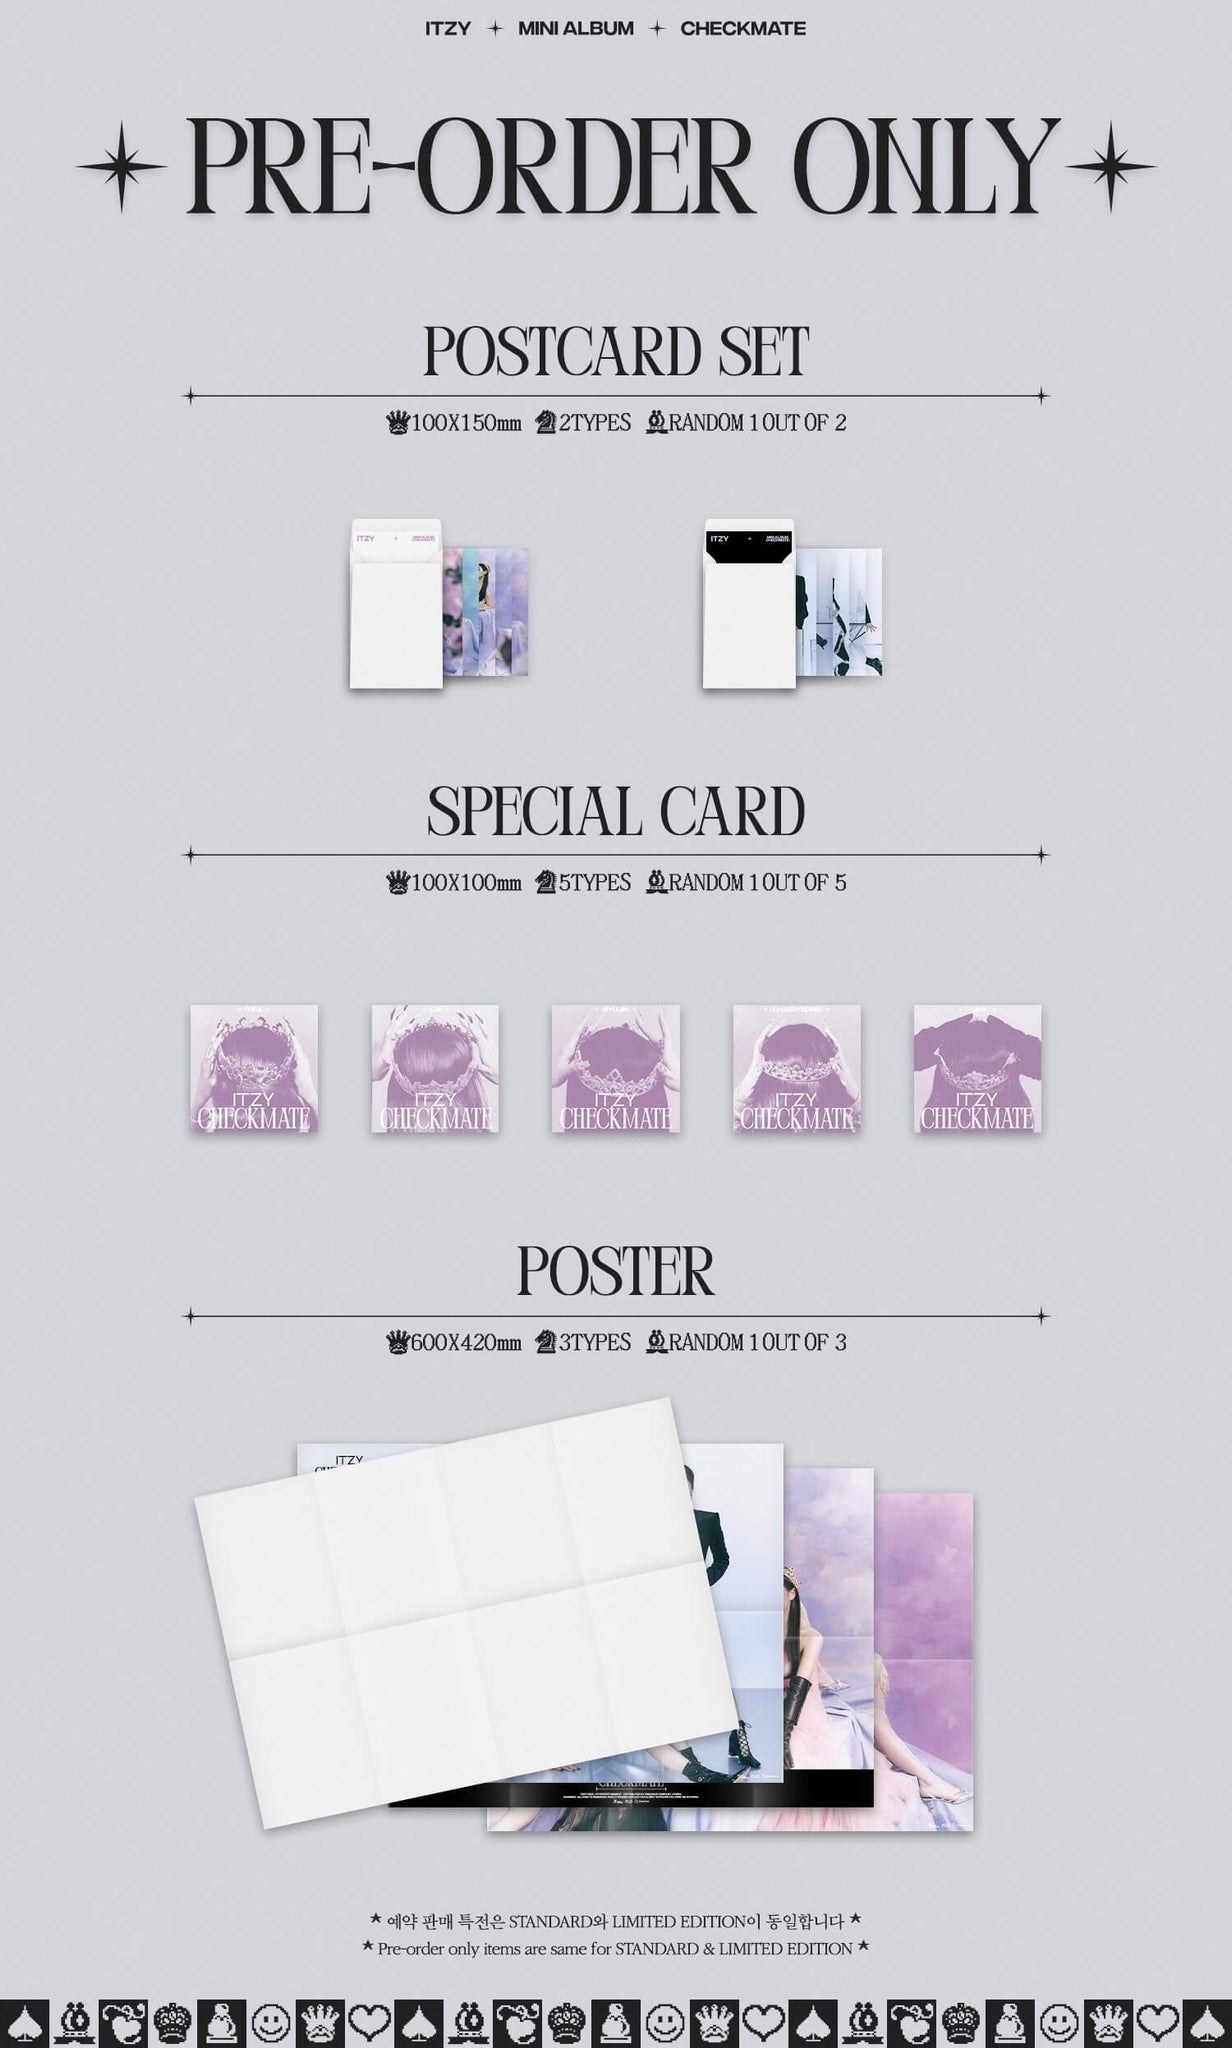 ITZY CHECKMATE (Standard Edition) Inclusions Pre-order Benefits Postcard Set Special Card Poster